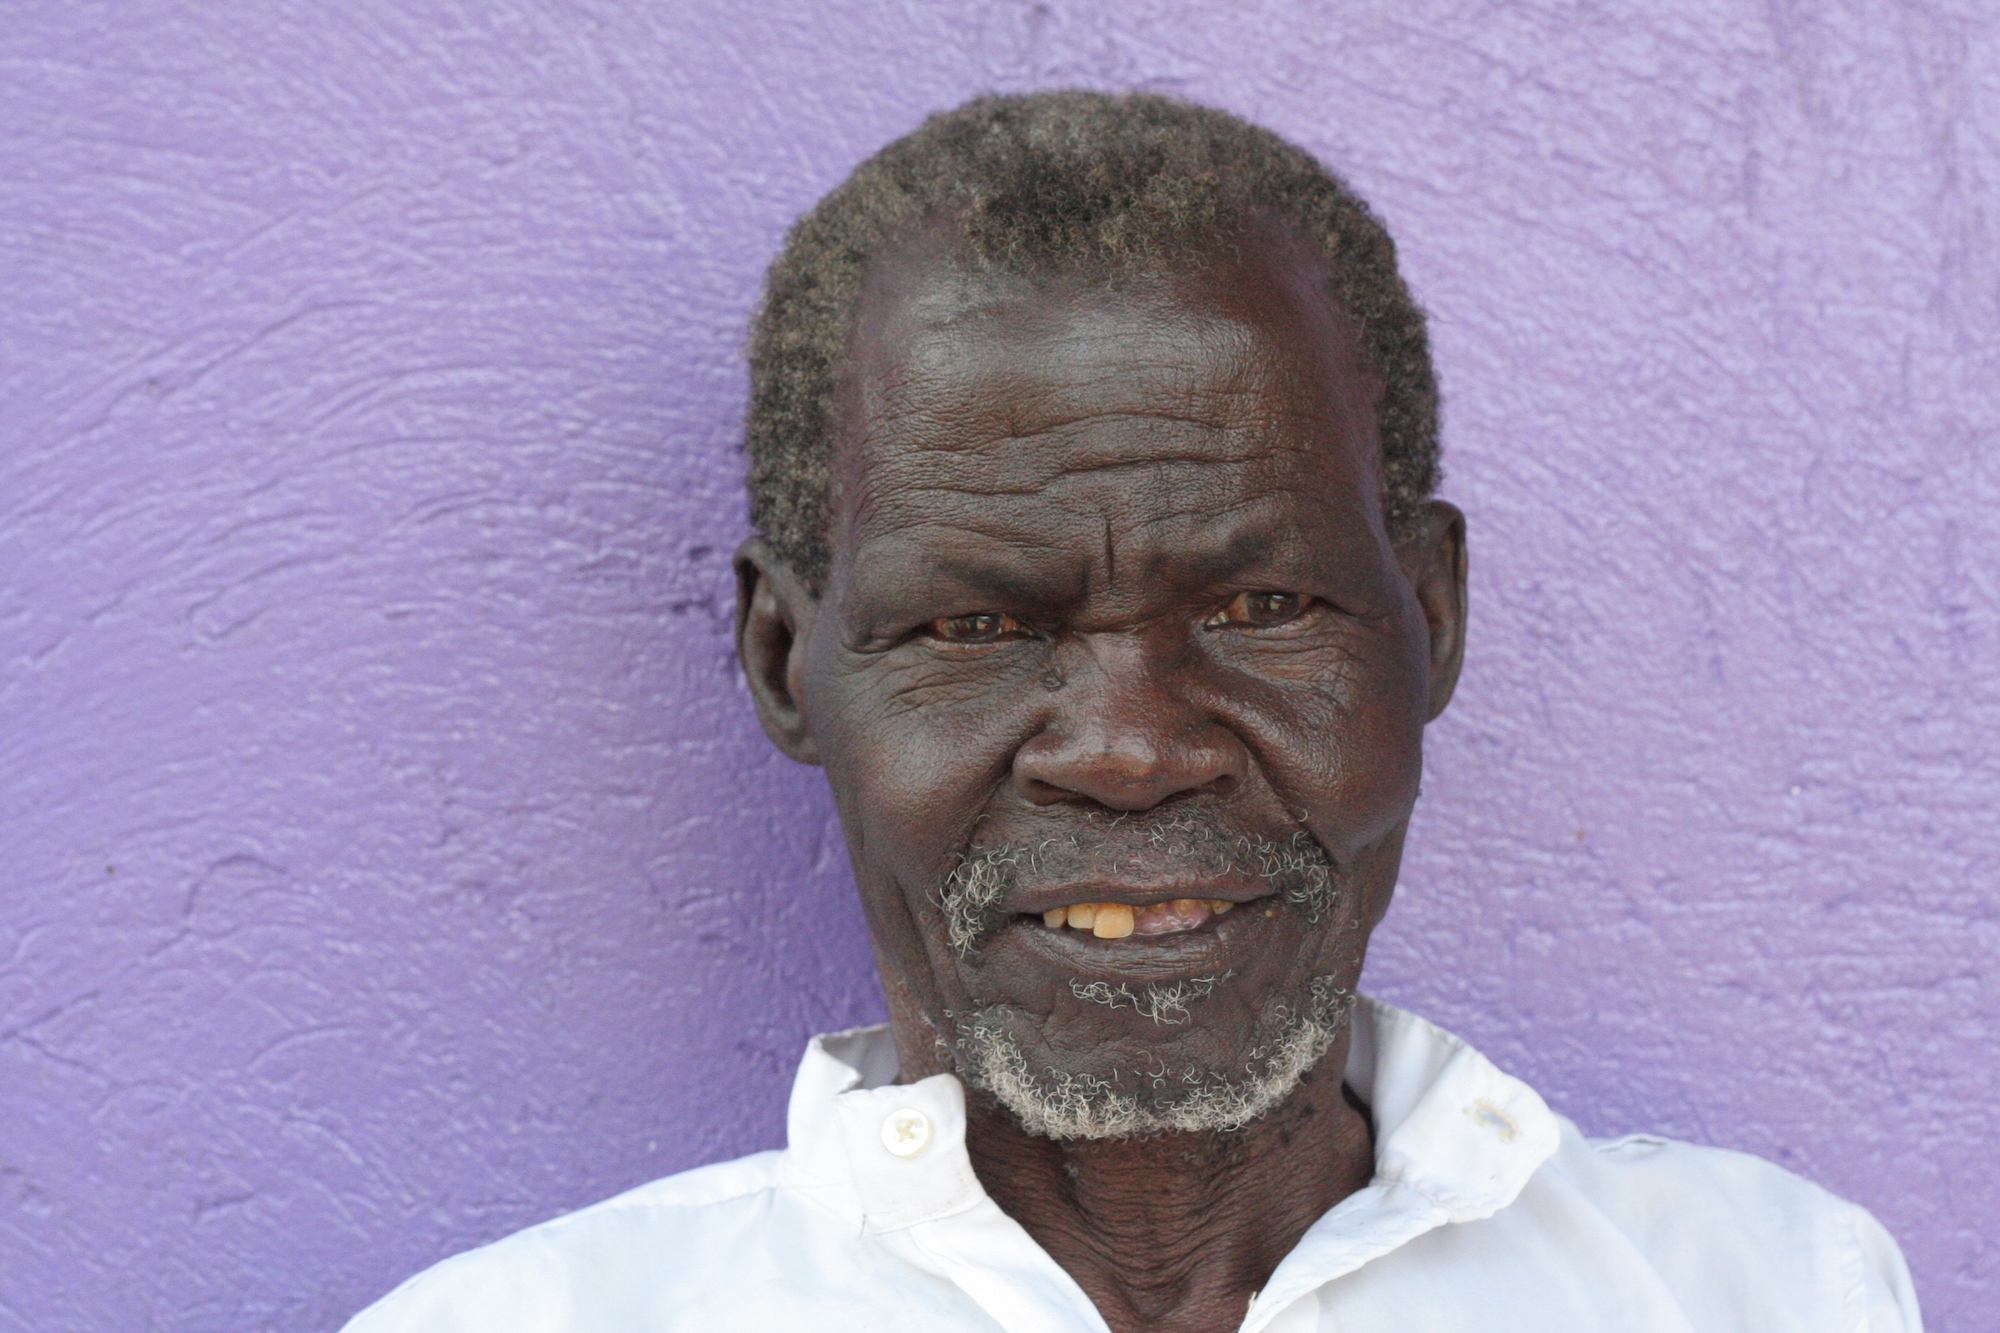 Man in front of a purple wall